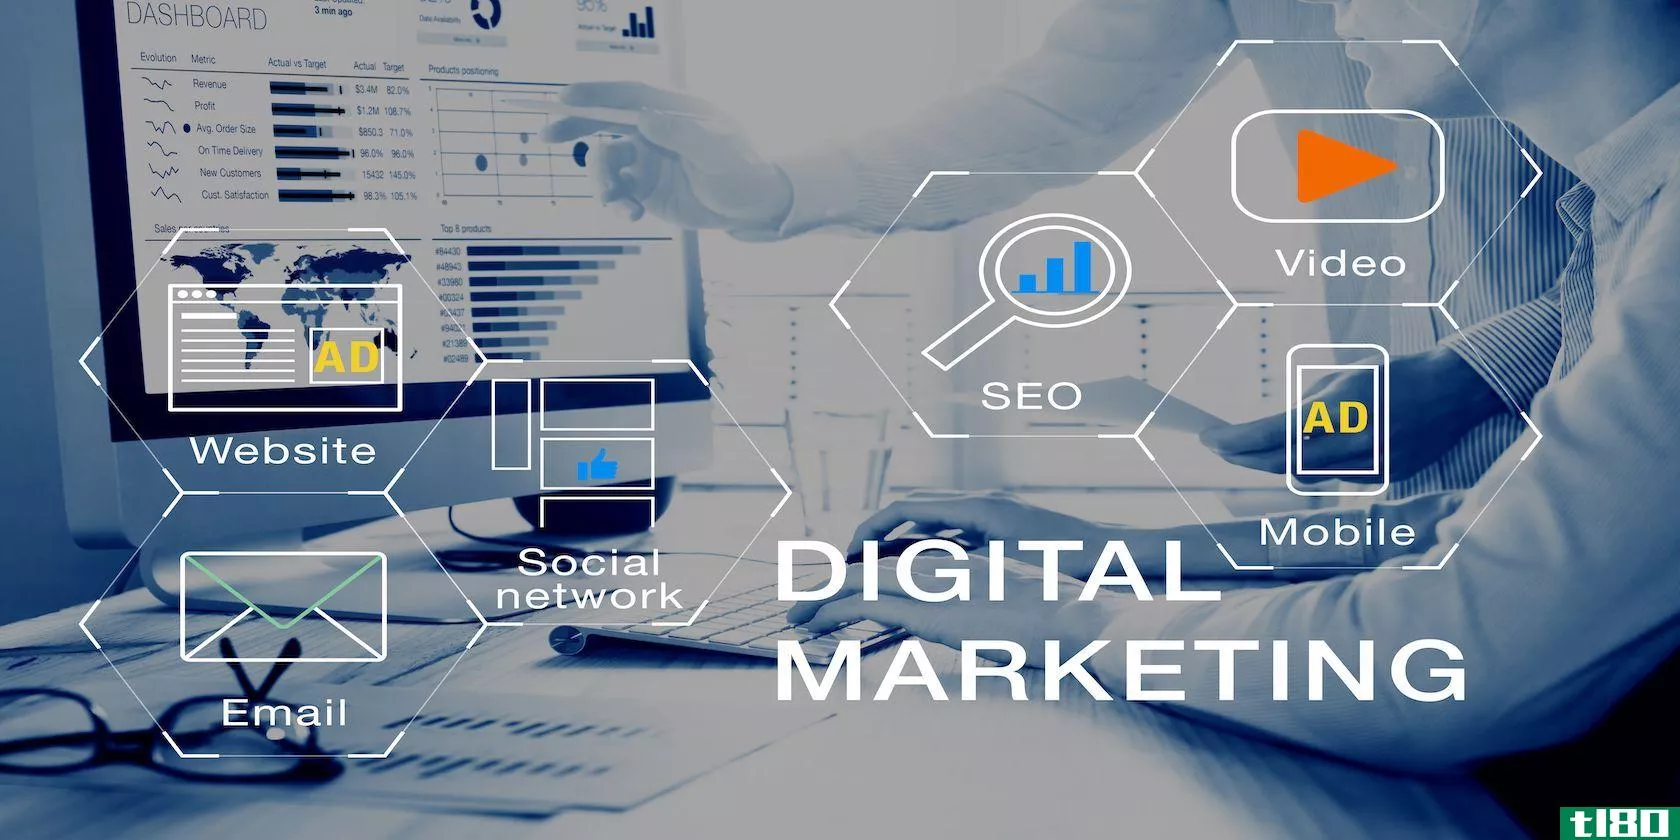 learn digital marketing with this course